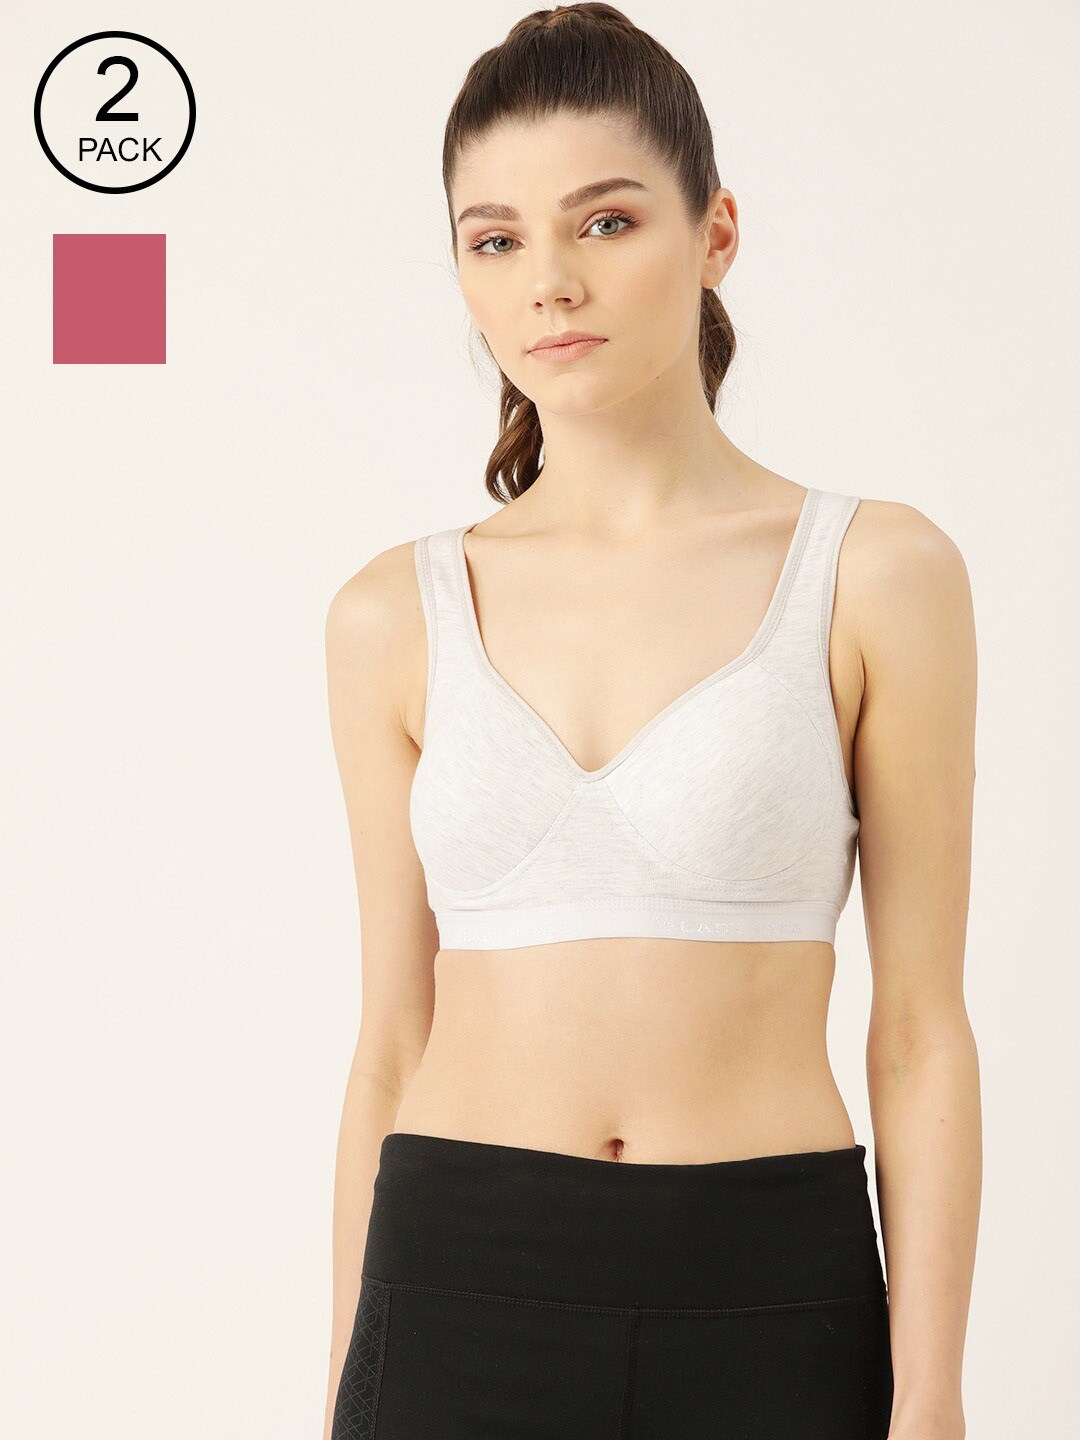 vimal Cotton Blend Ladies Sports Bras, For Inner Wear at Rs 60